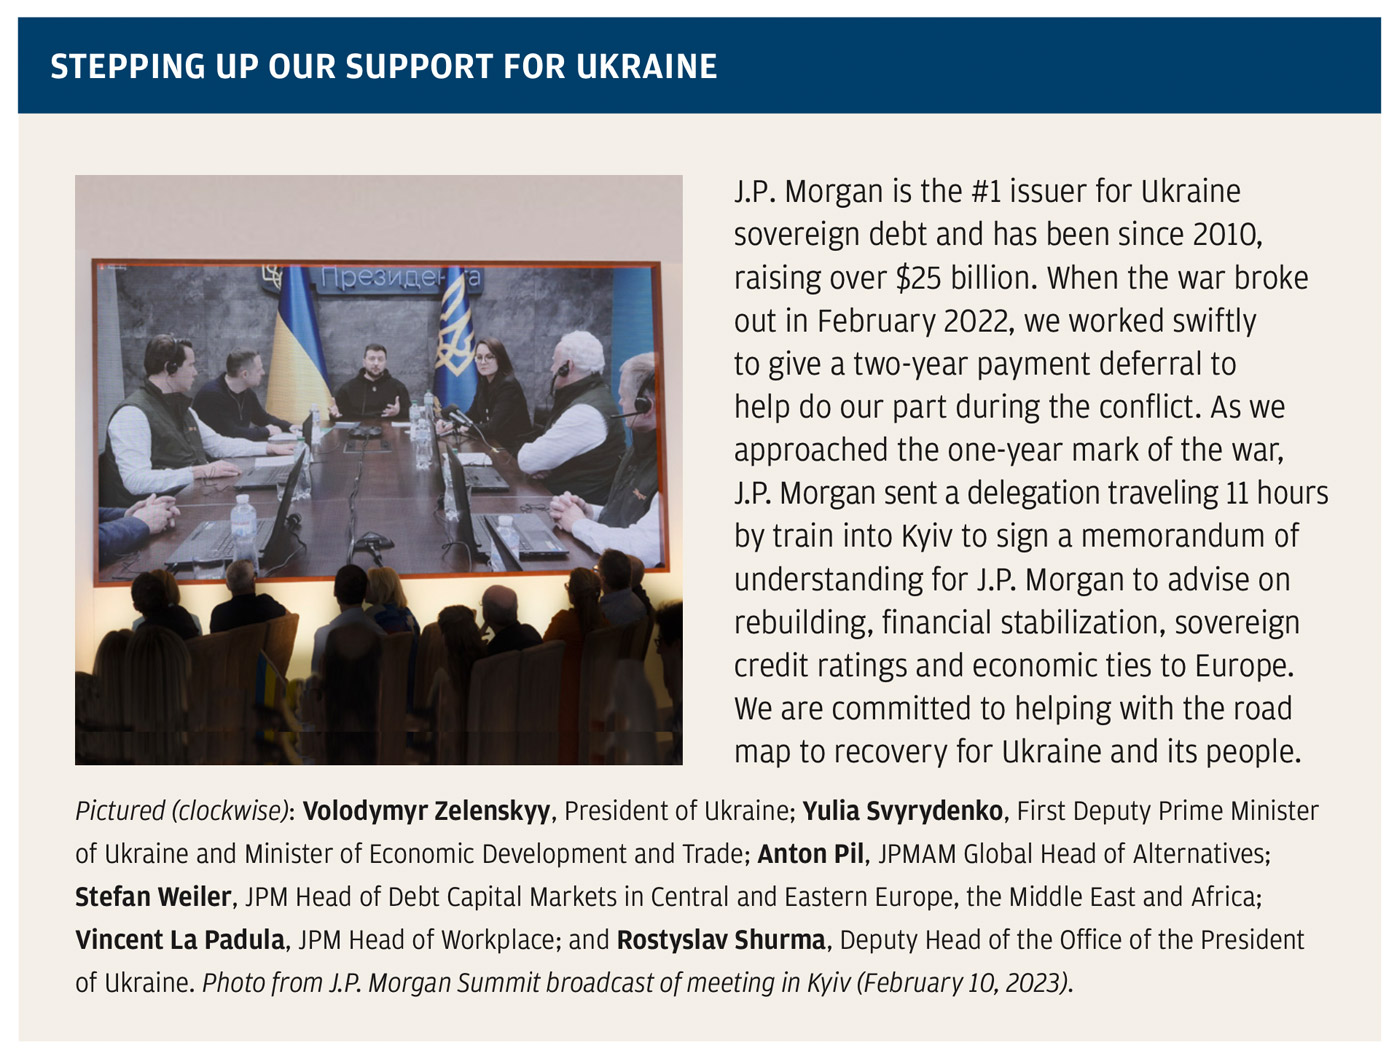 Stepping up our support for Ukraine